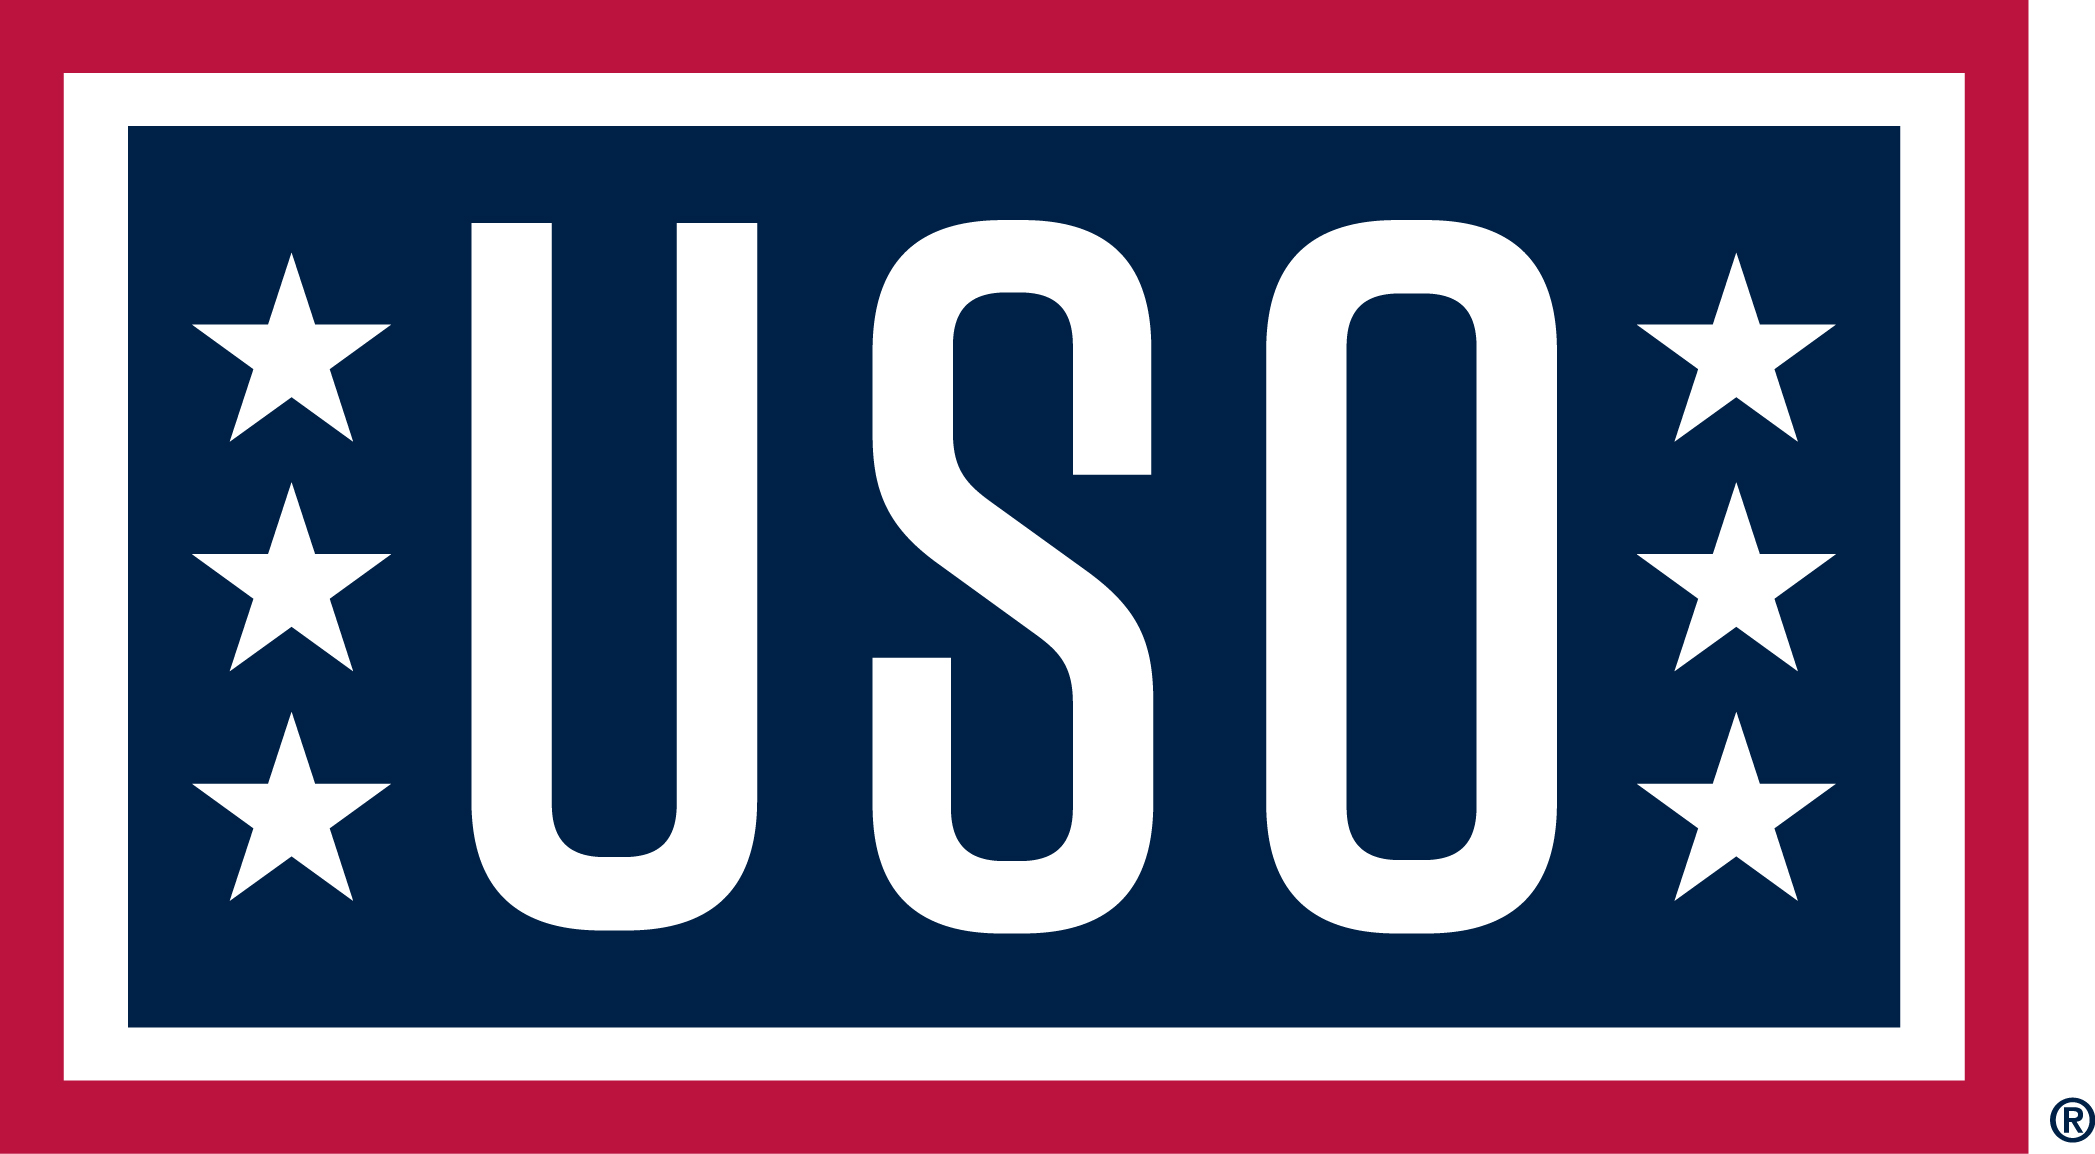 USO - $25 Charitable Contribution - Since 1941, the USO has been the nation’s leading organization to serve the men and women in the U.S. military, and their families, throughout their time in uniform. From the moment they join, through their assignments and deployments, and as they transition back to their communities, the USO is always by their side.

The USO is not part of the federal government. A congressionally chartered, private organization, the USO relies on the generosity of individuals, organizations and corporations to support its activities, and is powered by a family of volunteers to accomplish our mission of connection.